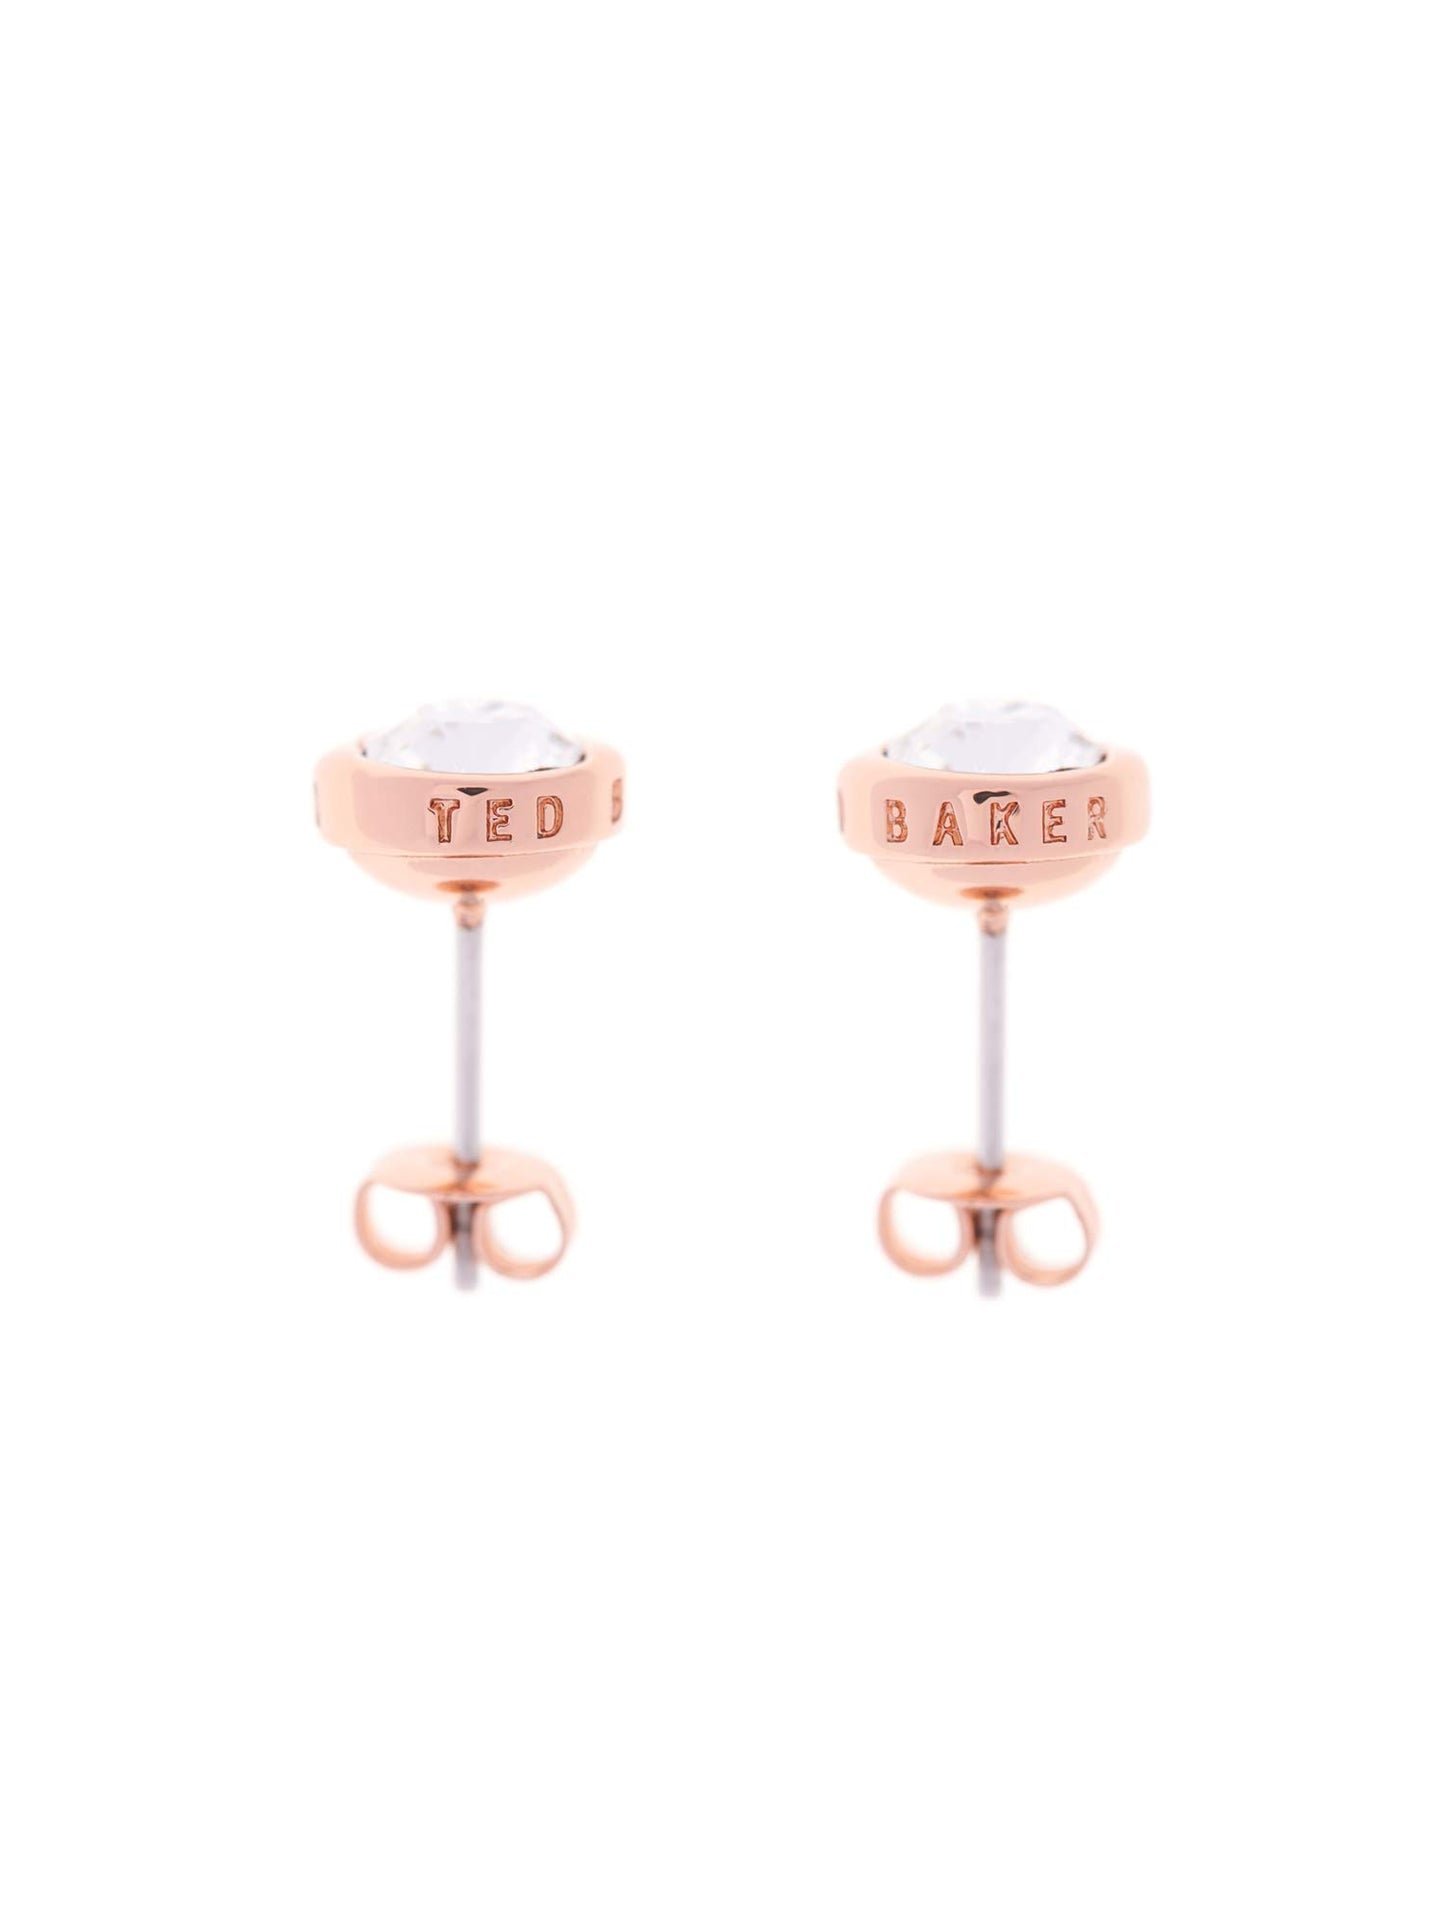 Ted Baker Sinaa Crystal Stud Earrings - Silver or Rose Gold Tone Options